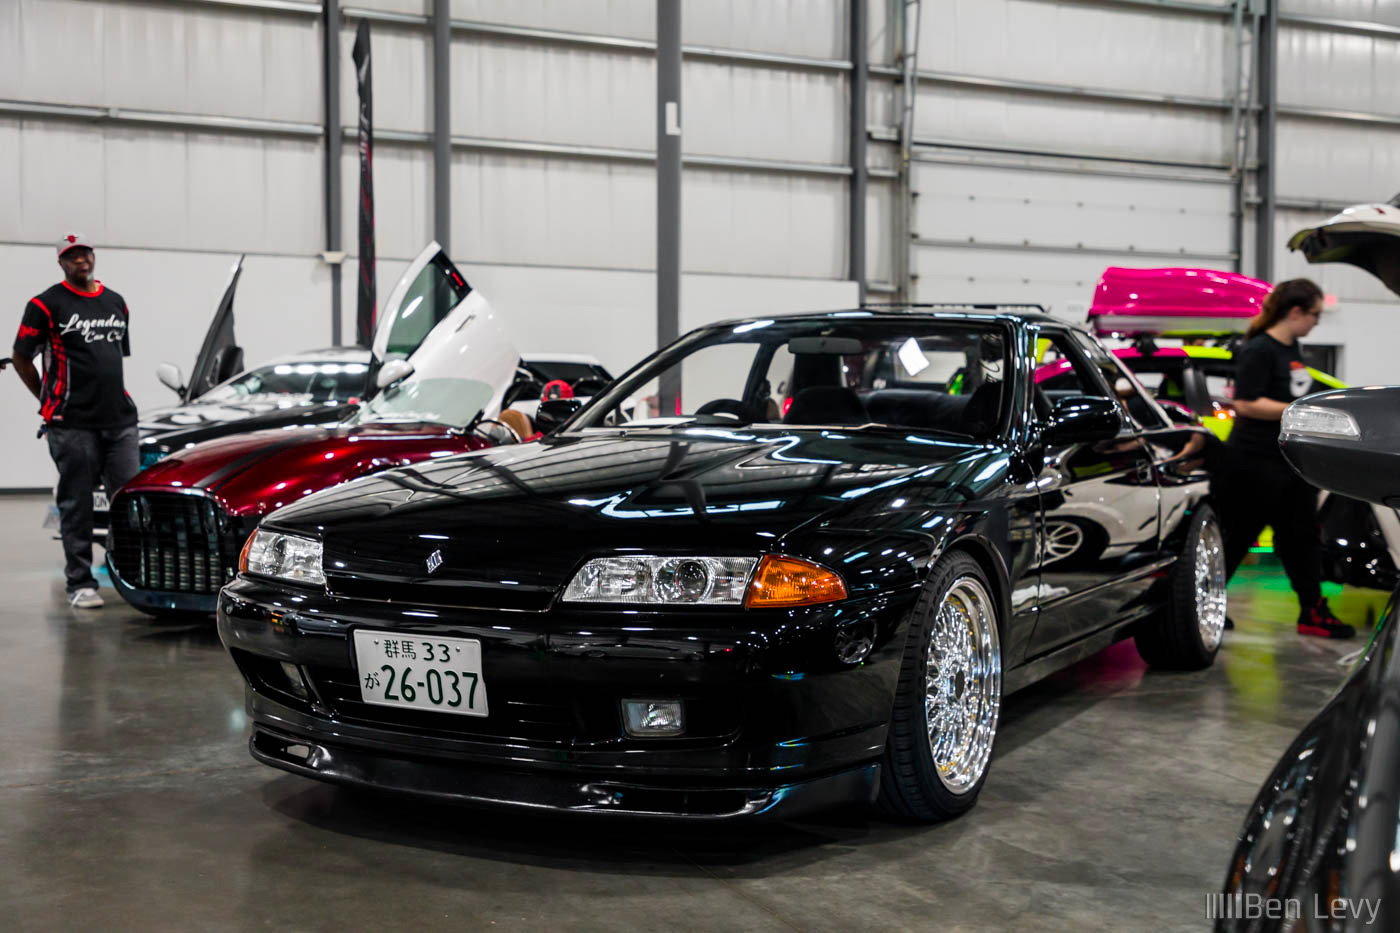 Black R32 Nissan Skyline at Cars and Culture Show in Grayslake, IL